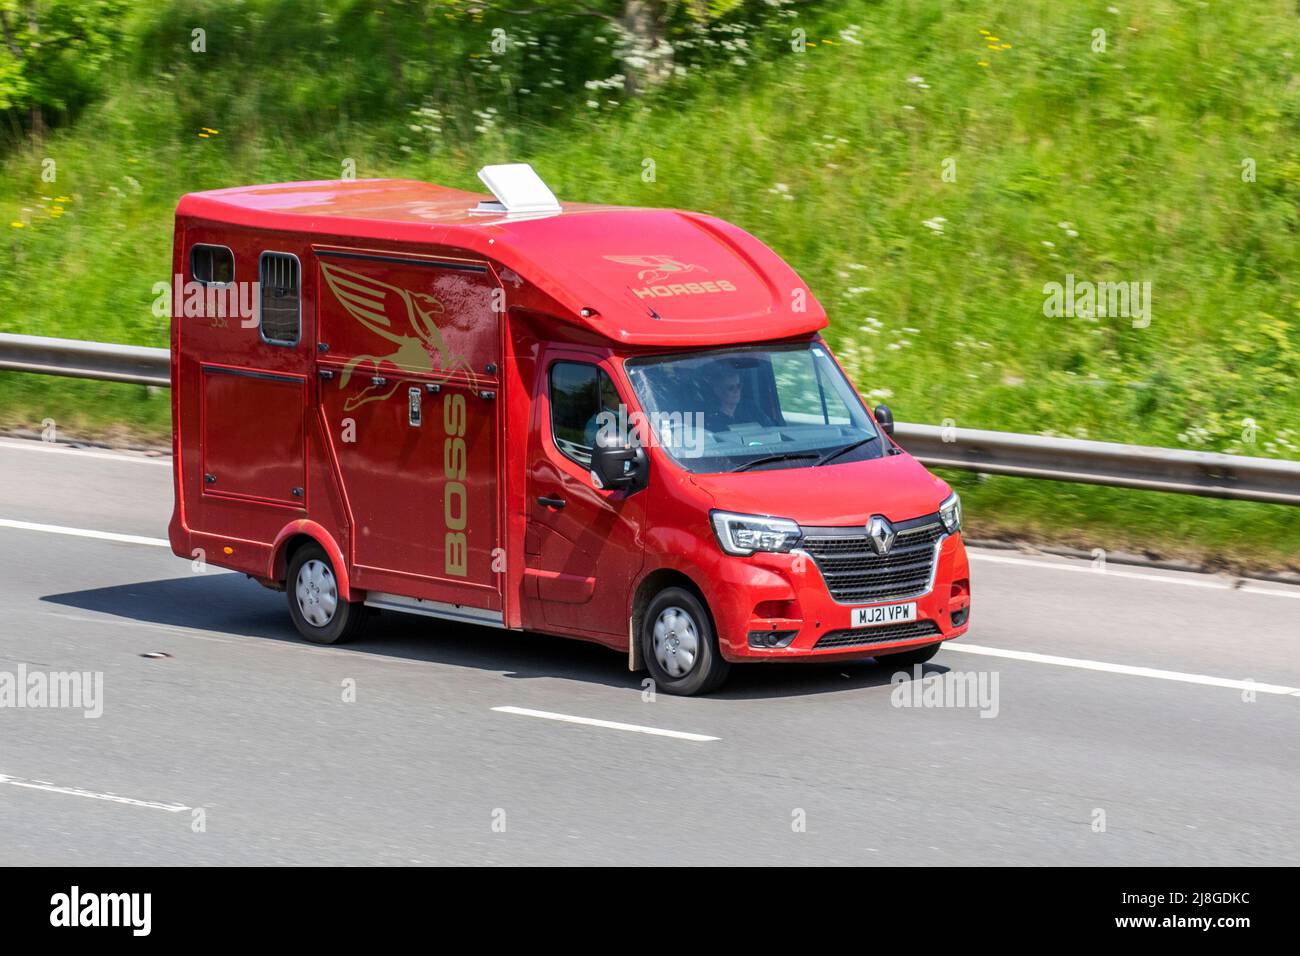 2021 red BOSS Supa-Lite 35 Horsebox, RENAULT MASTER MM35 B-NESS ENGY DCi SA MM35 BUSINESS Energy Quickshift 2298cc Diesel Van; driving on the M6 Motorway, Manchester, UK Stock Photo